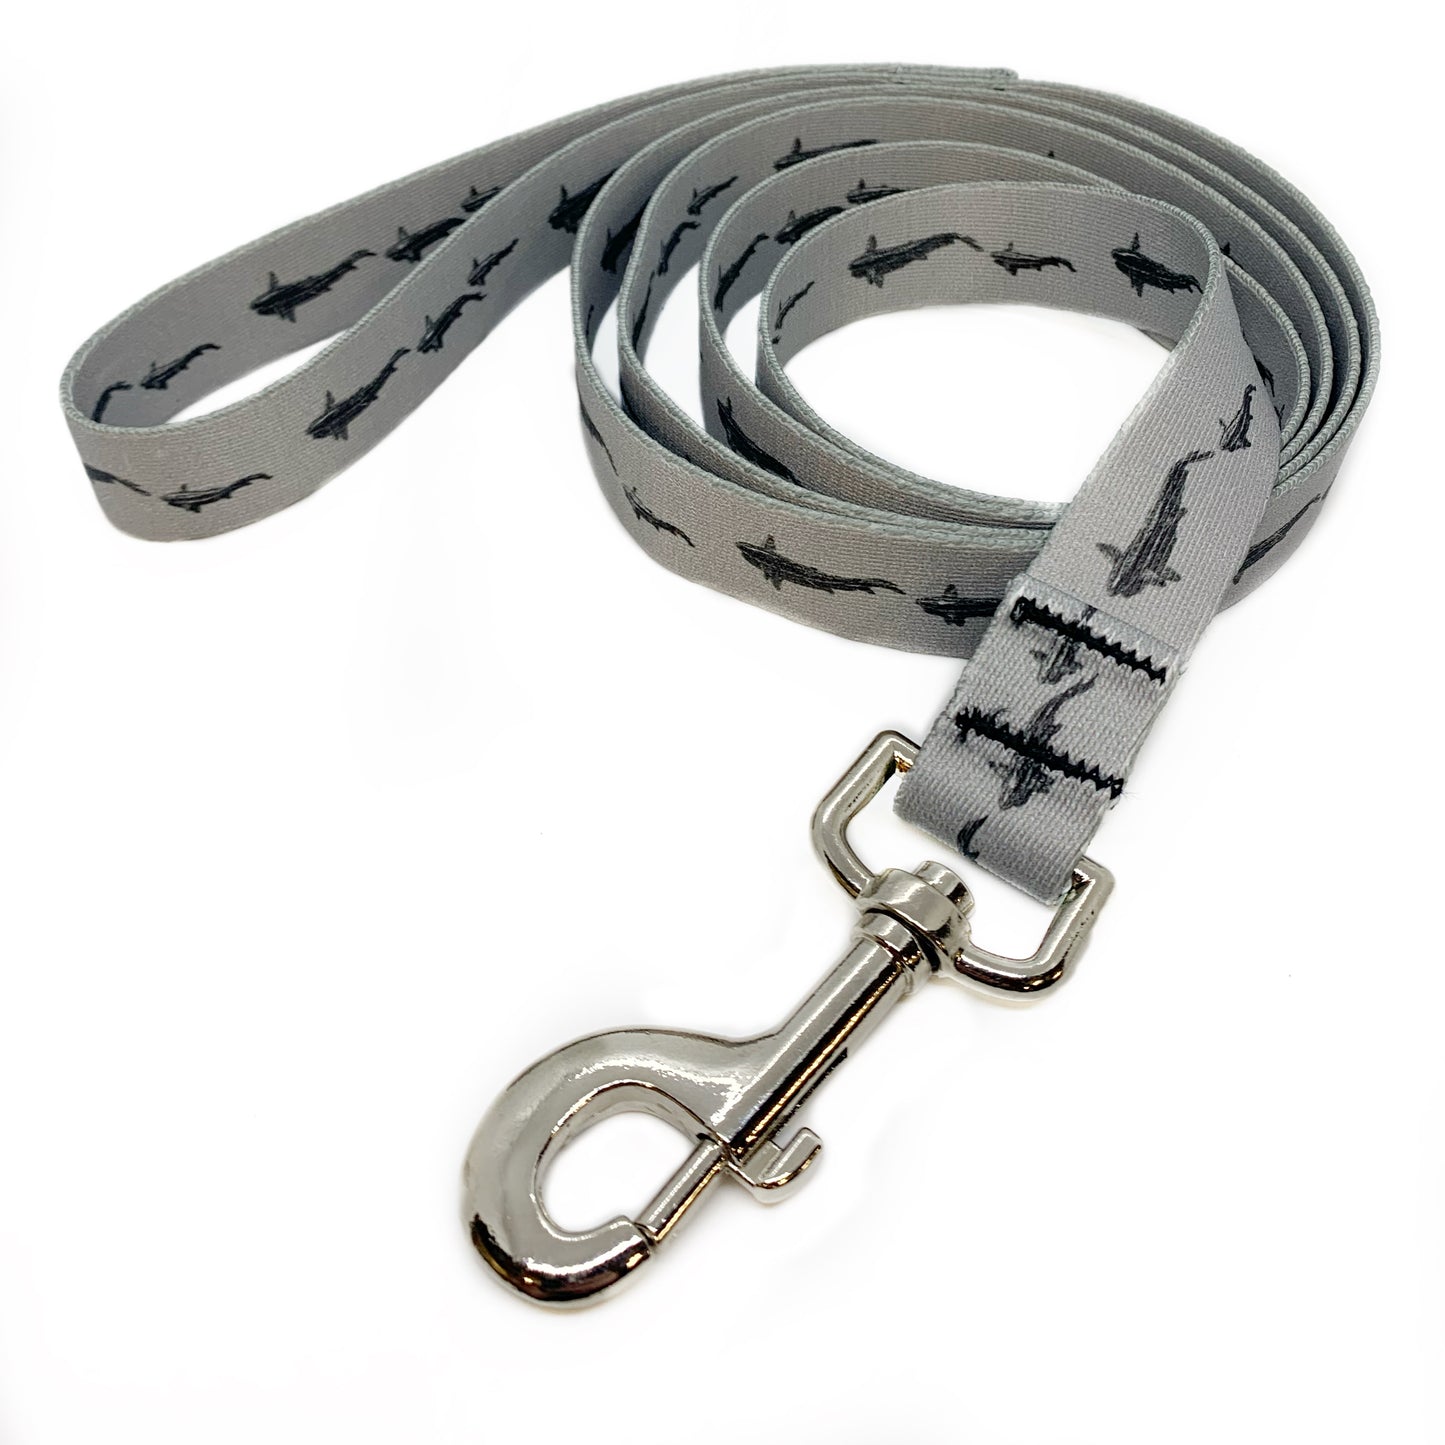 A gray nylon dog leash is shown. Trout from above are printed on it.